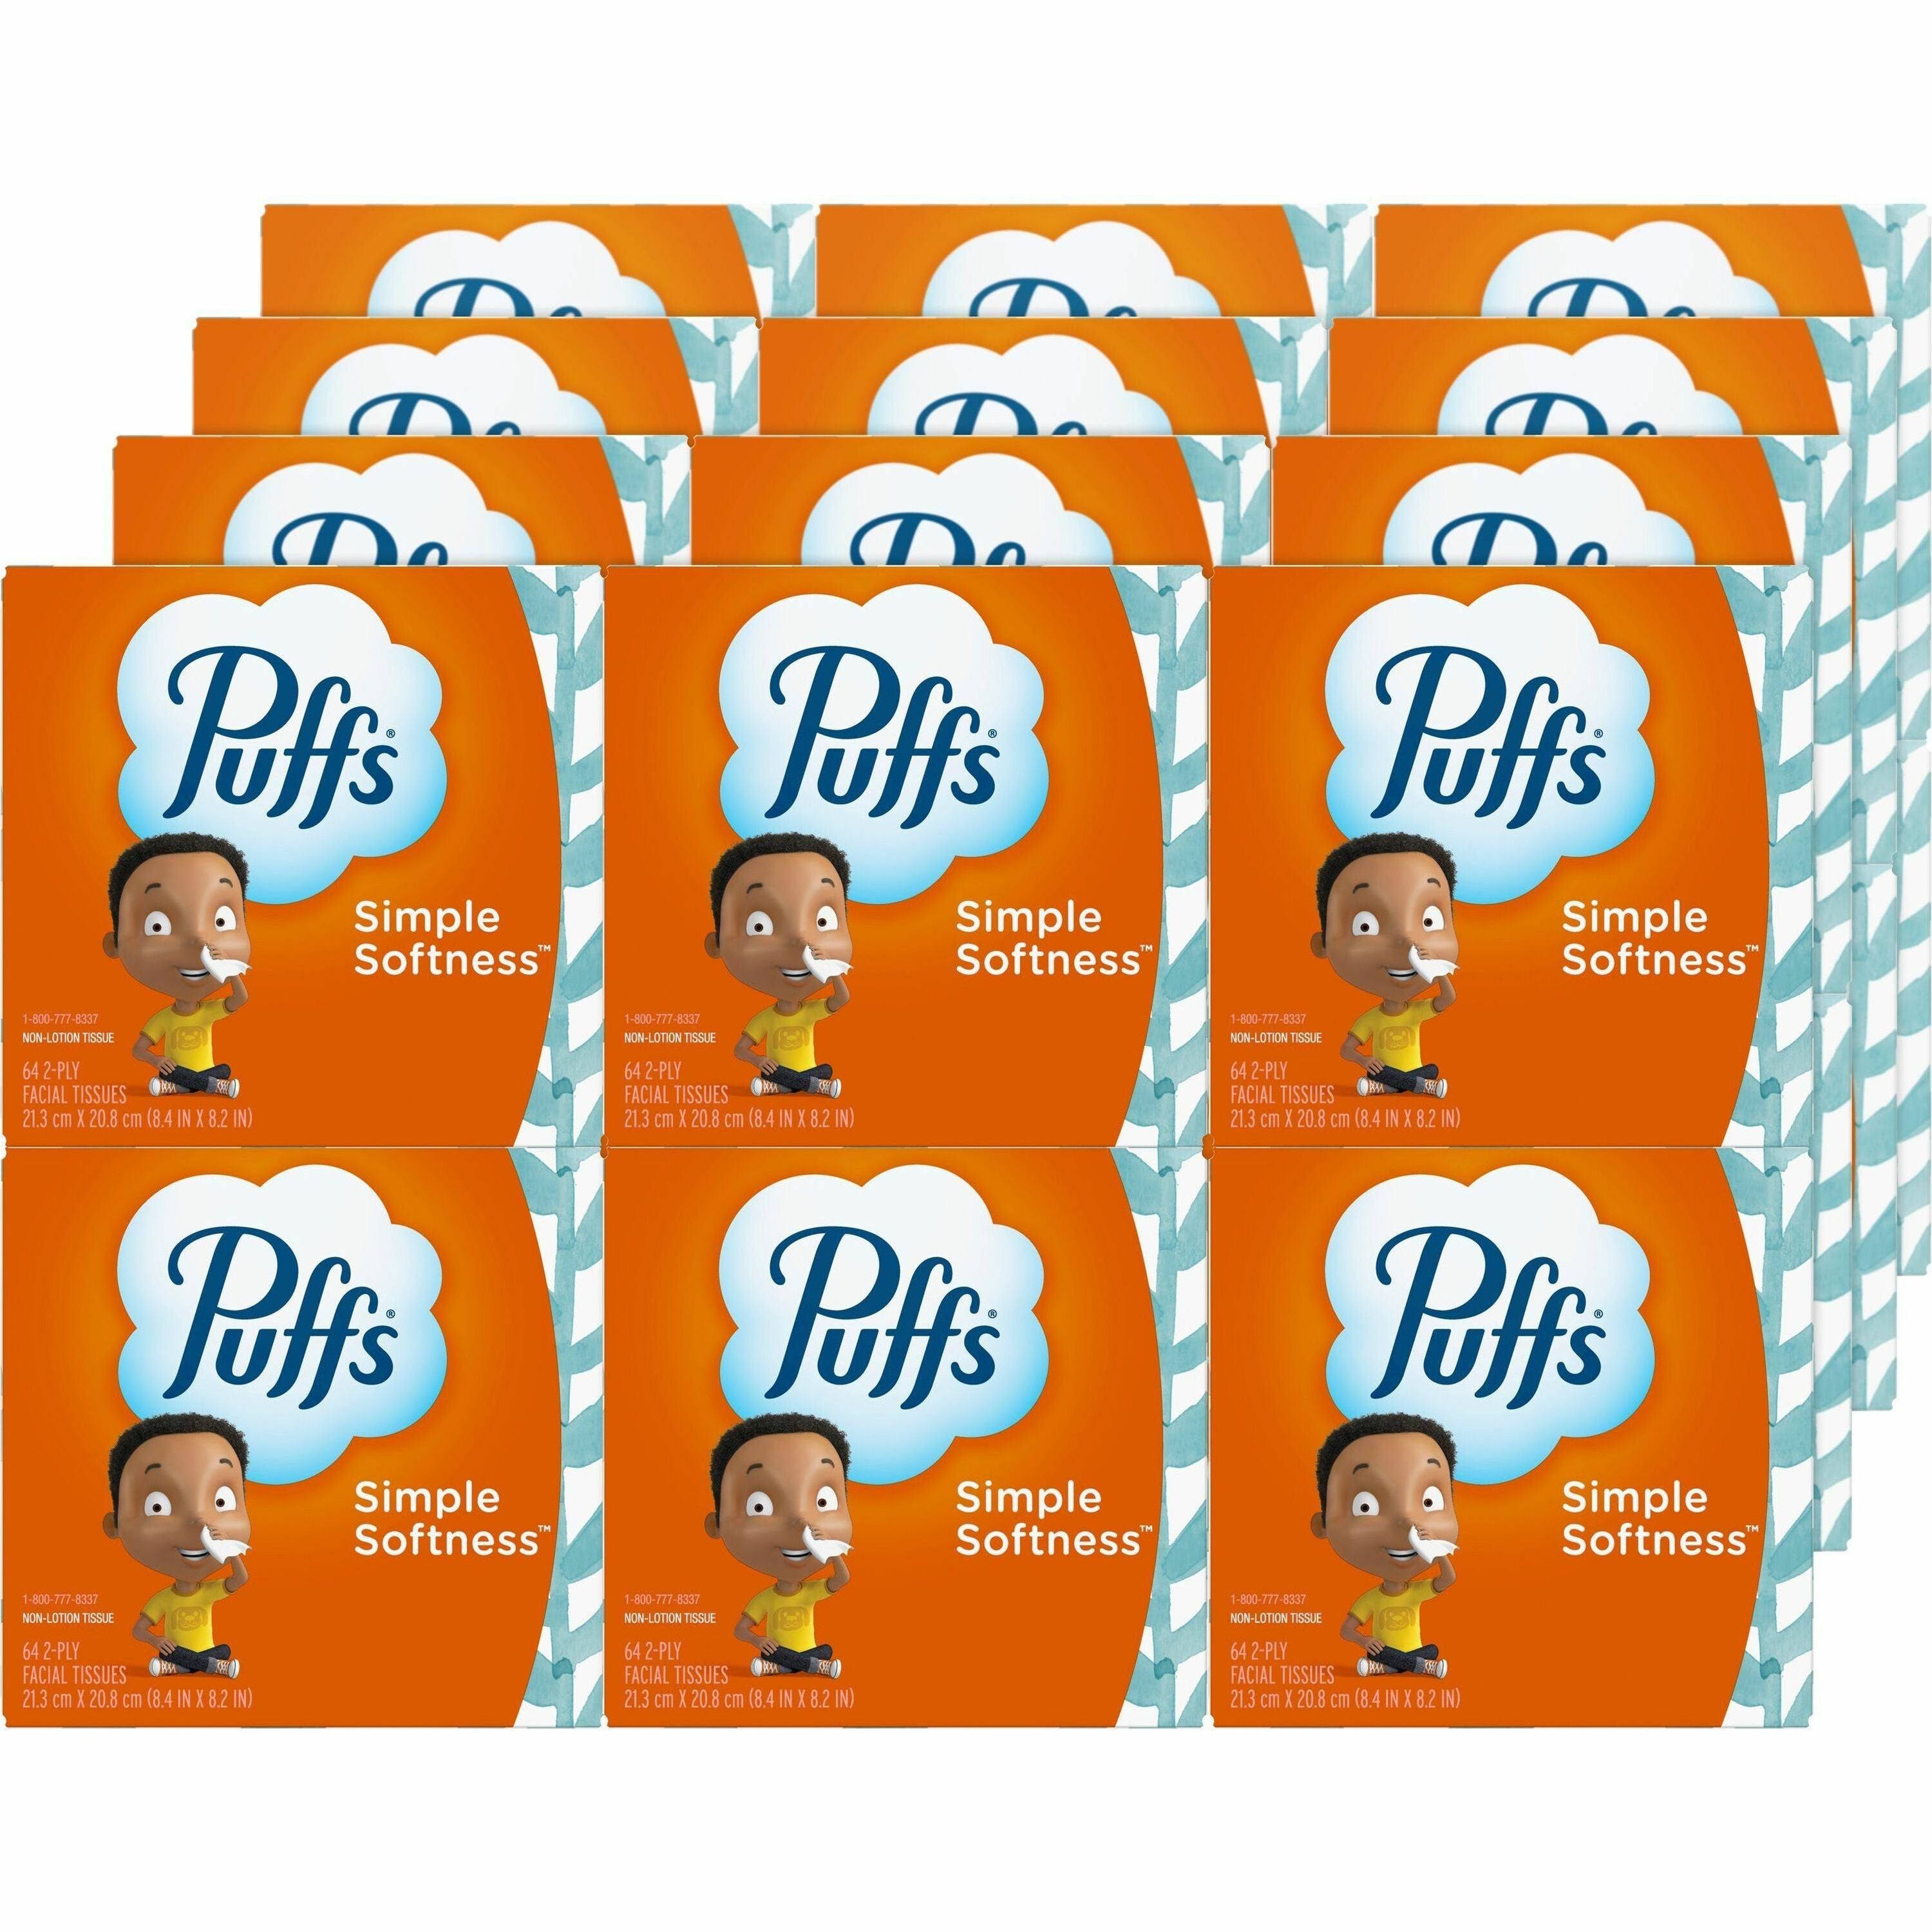 puffs-basic-facial-tissue-2-ply-840-x-820-white-soft-comfortable-allergen-free-durable-strong-lotion-free-fragrance-free-for-room-skin-home-skin-64-per-box-24-carton_pgc84405ct - 1